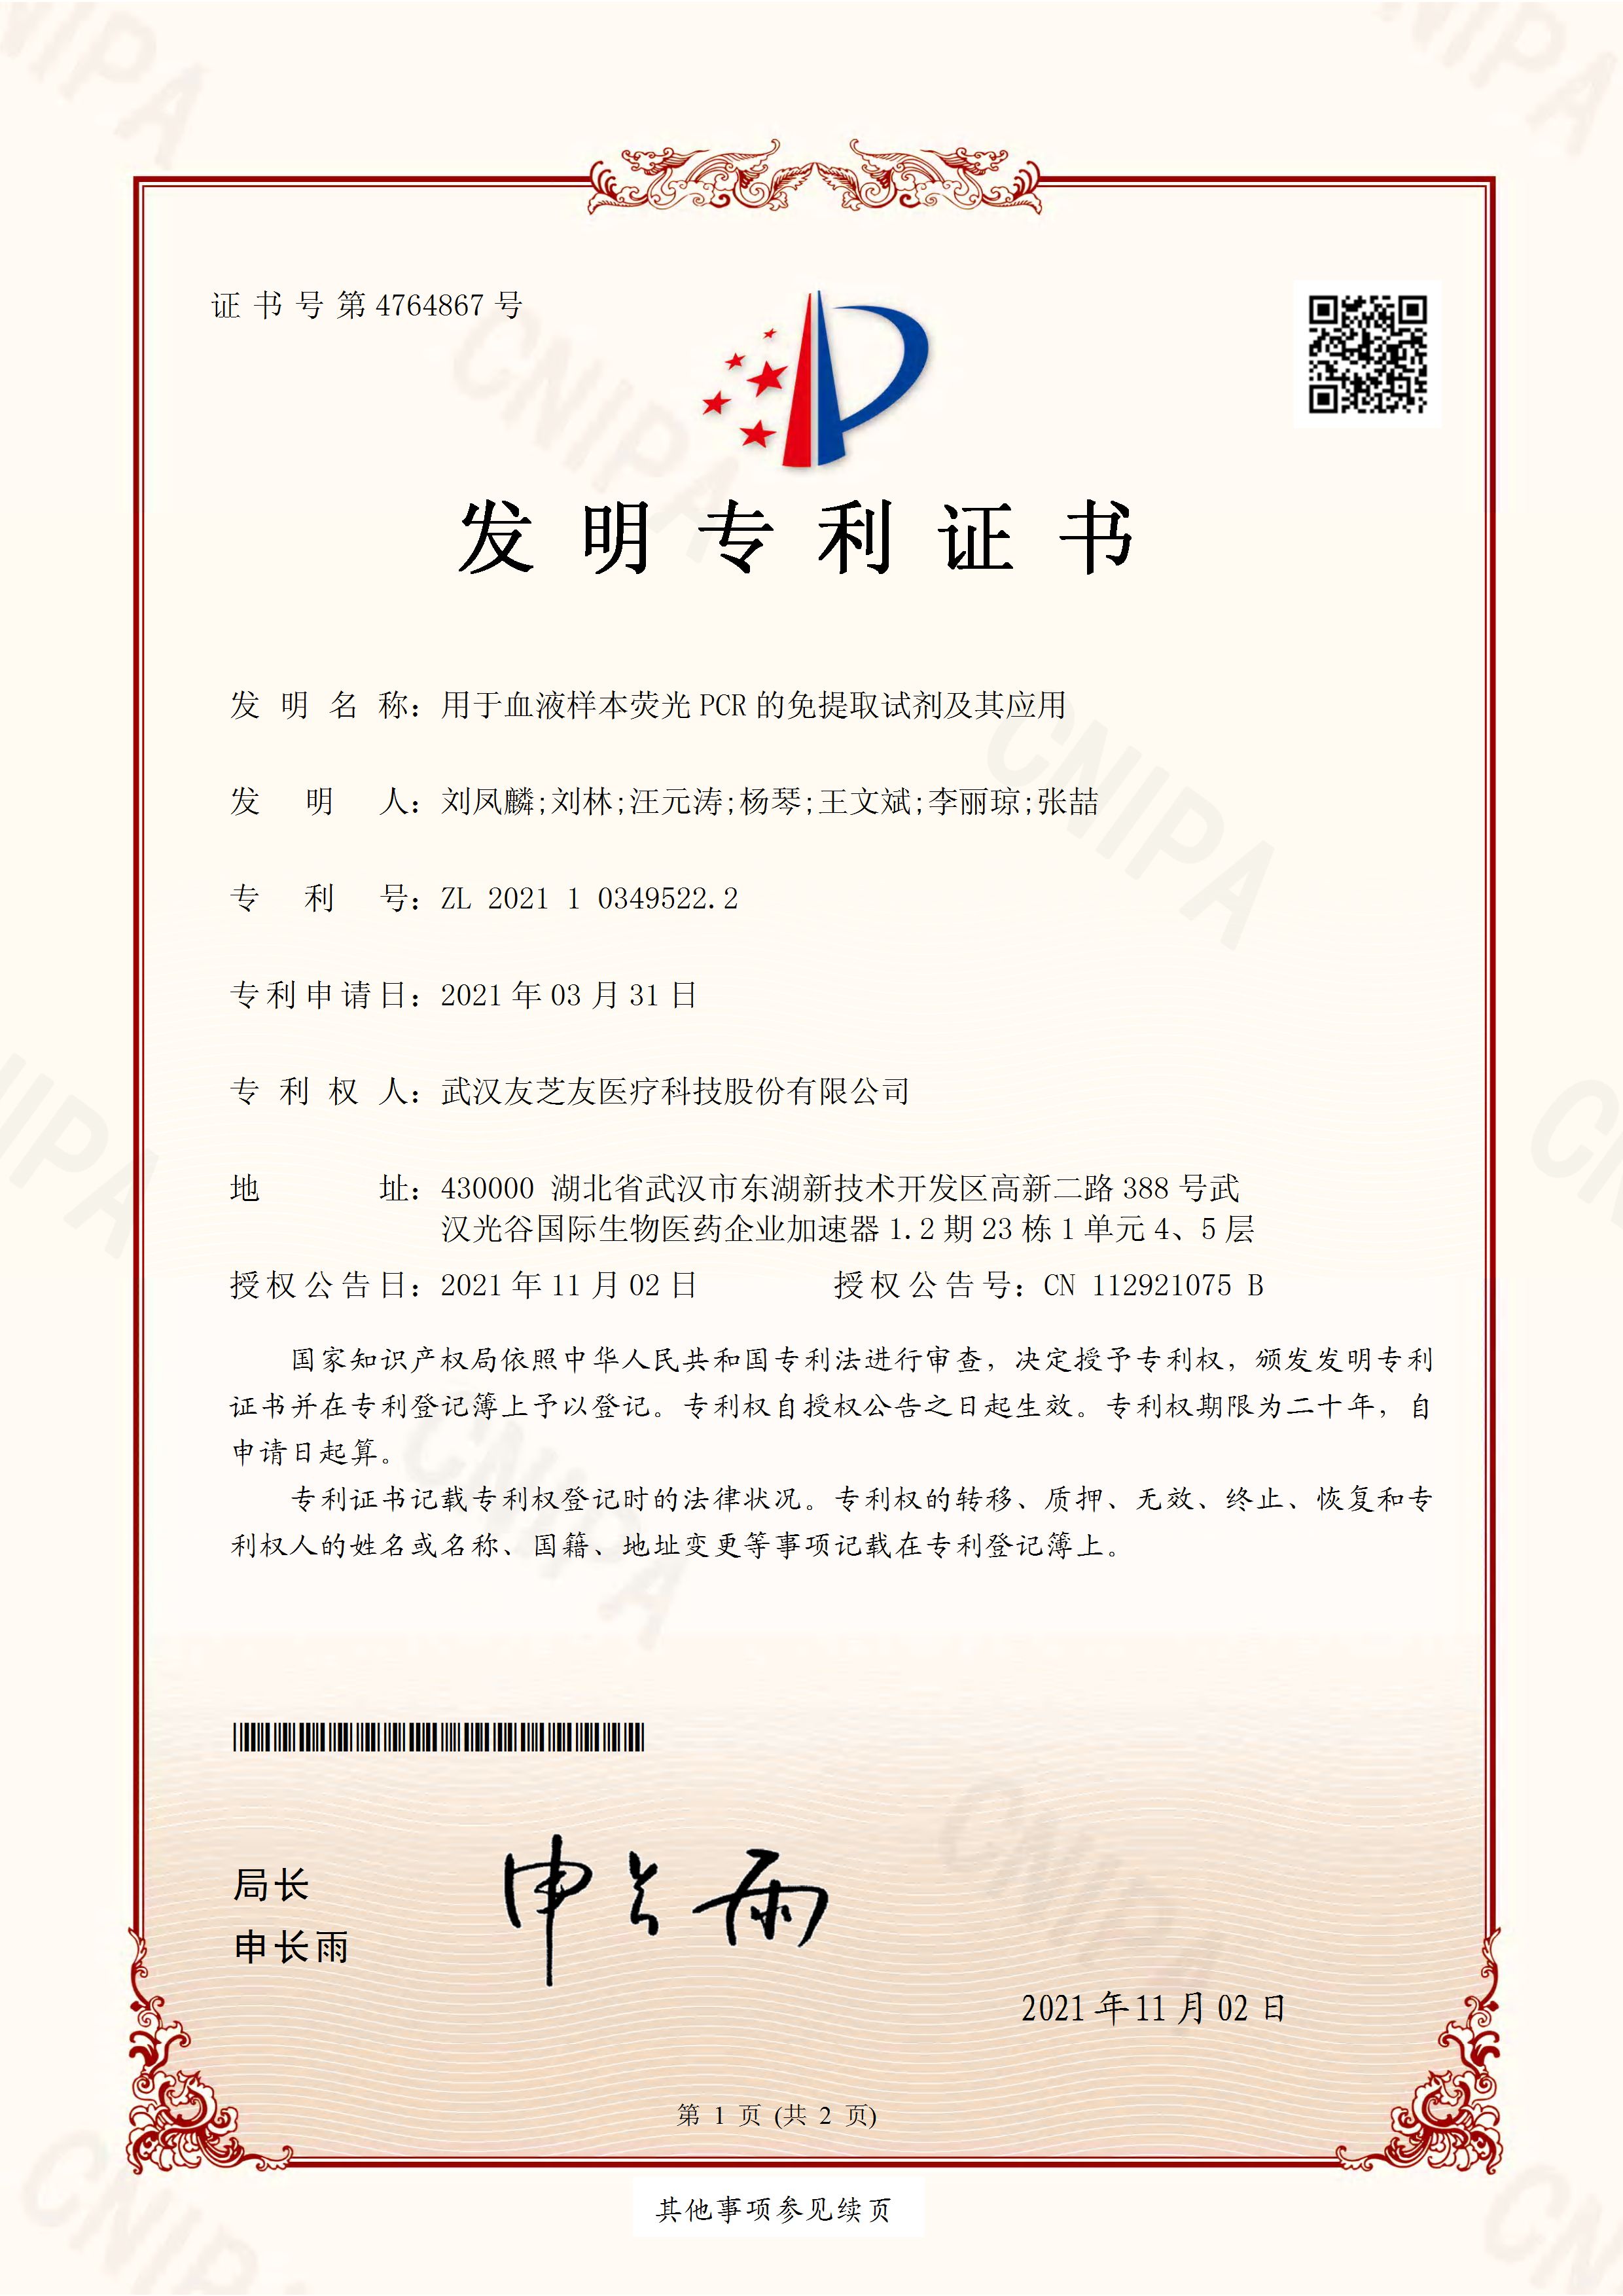 Patent Certificate for Invention of Free Extraction Reagent